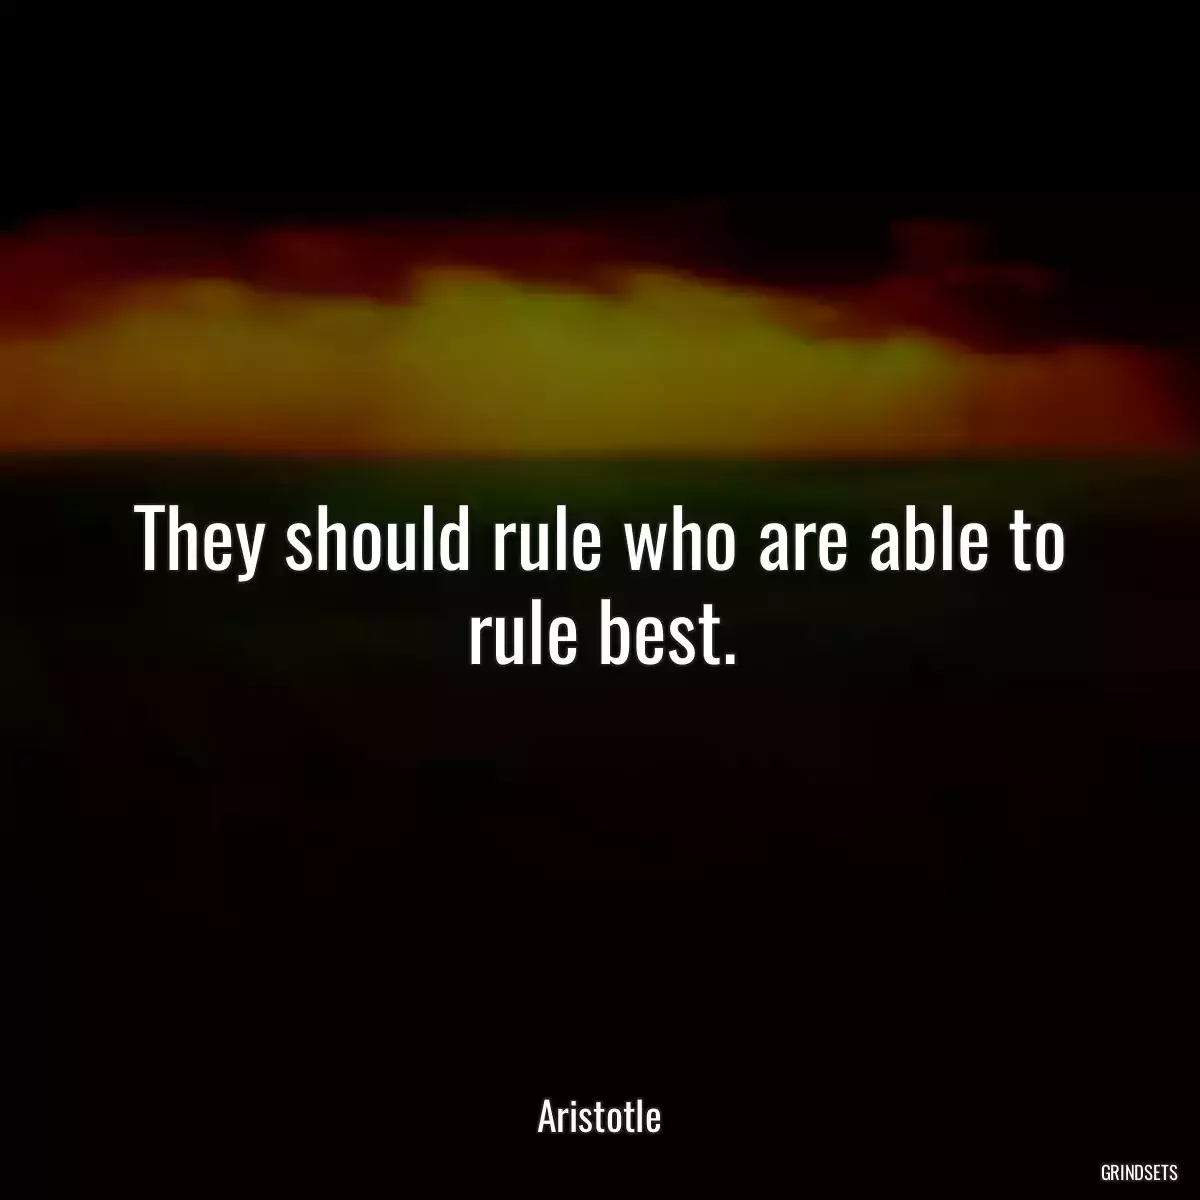 They should rule who are able to rule best.